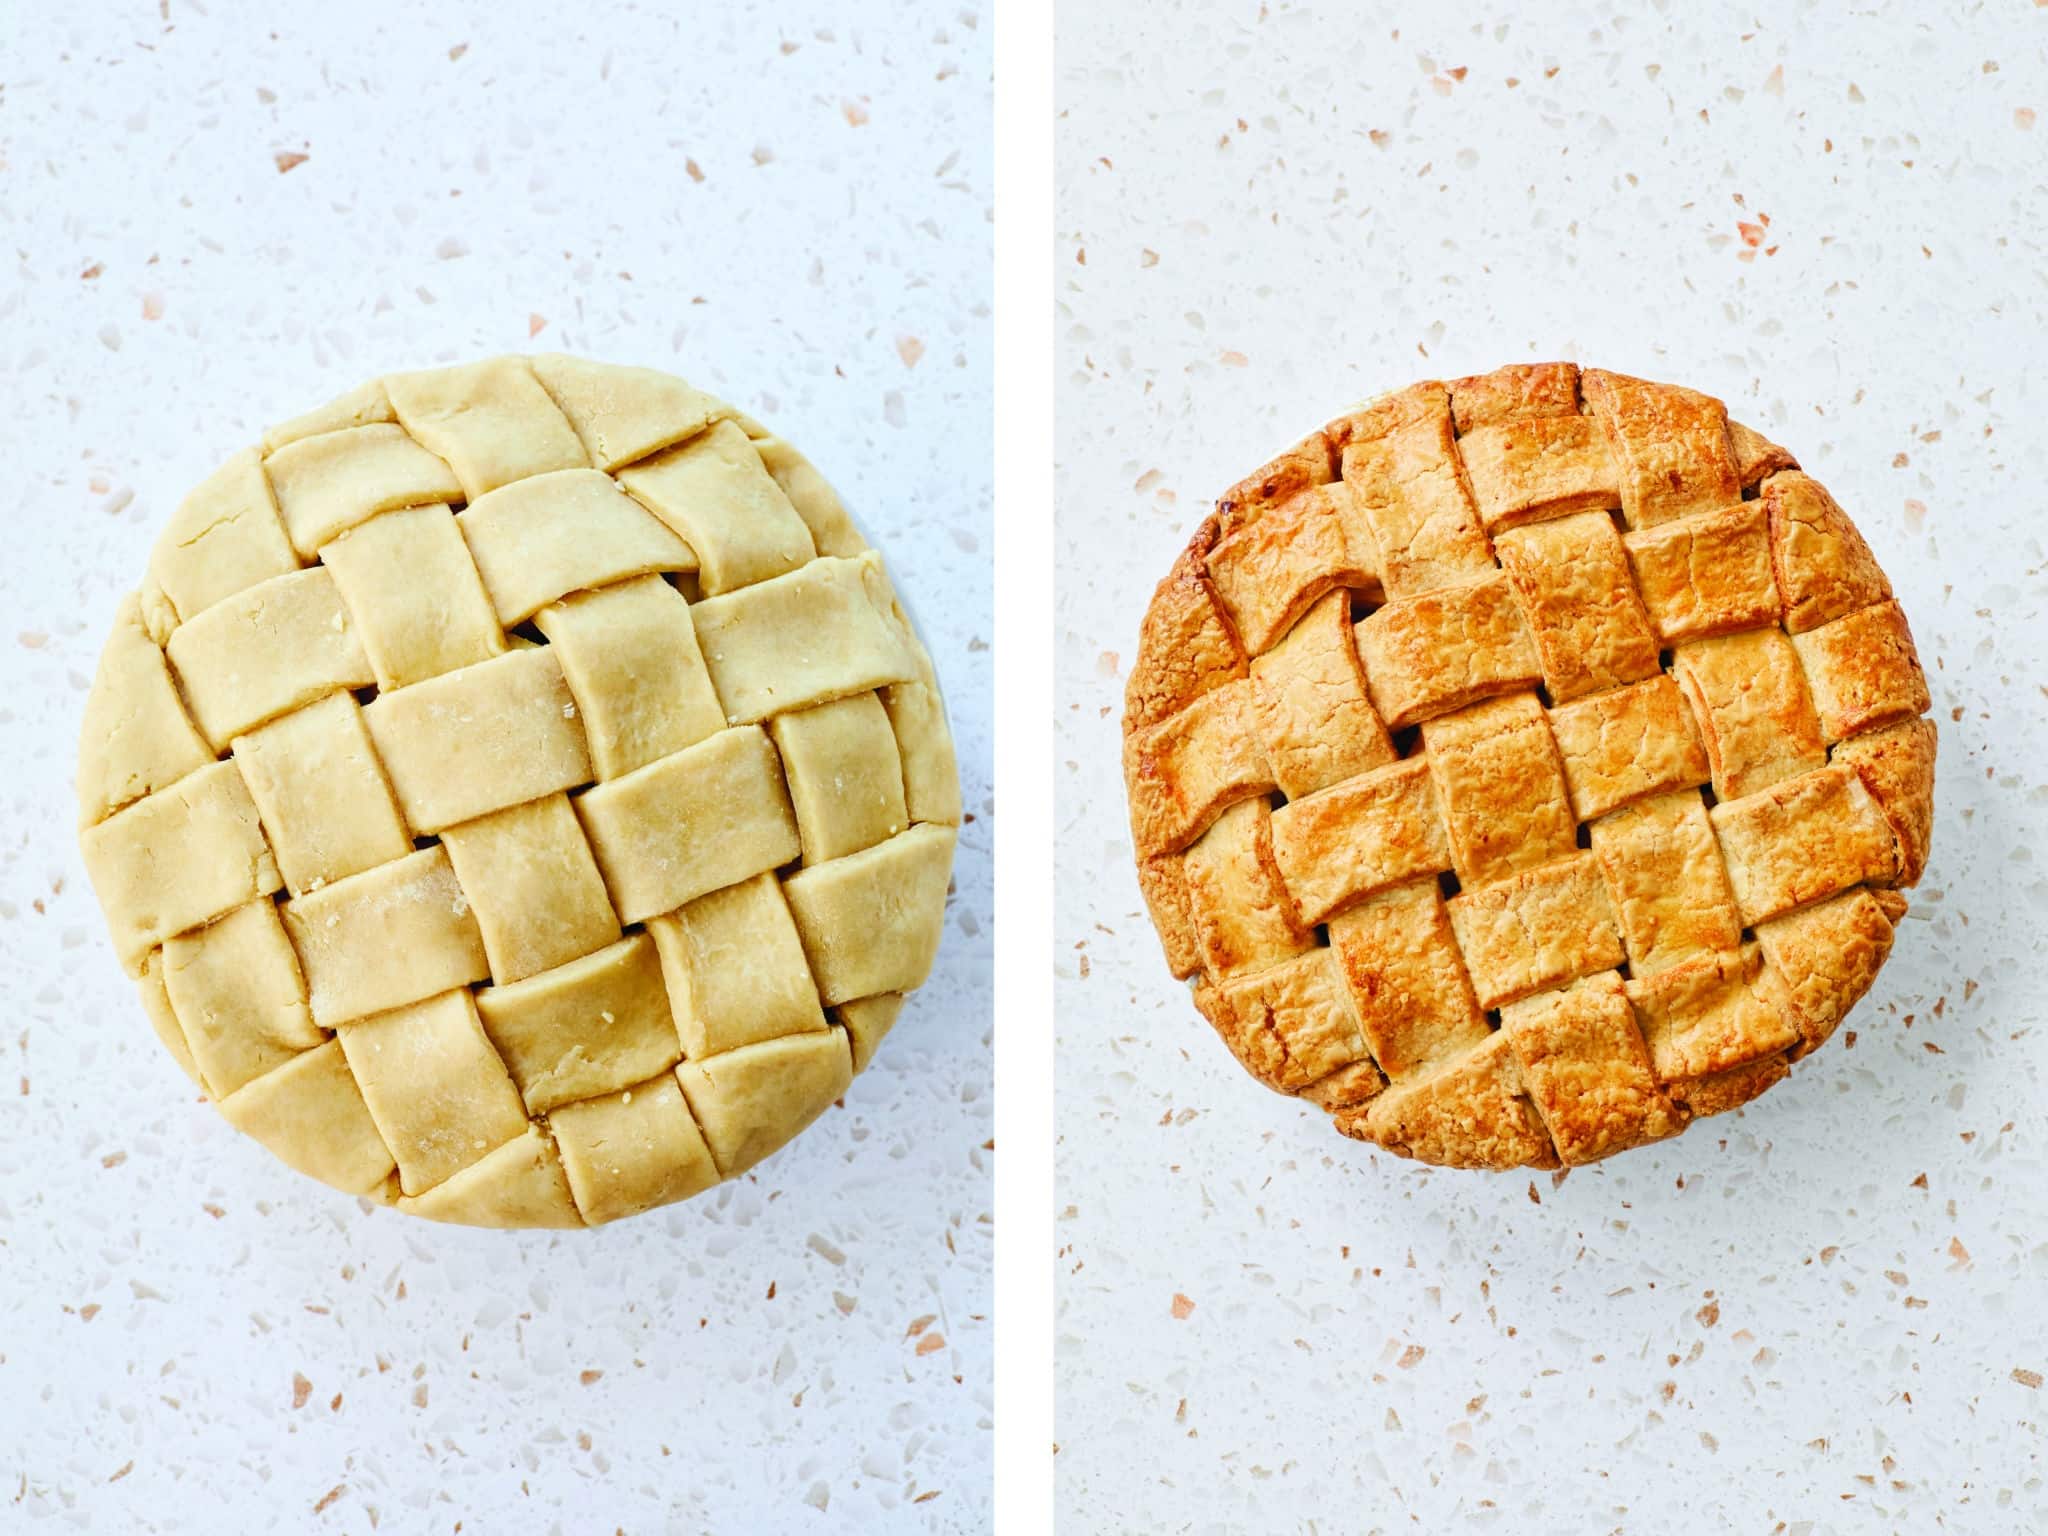 The before and after of a lattice pie.